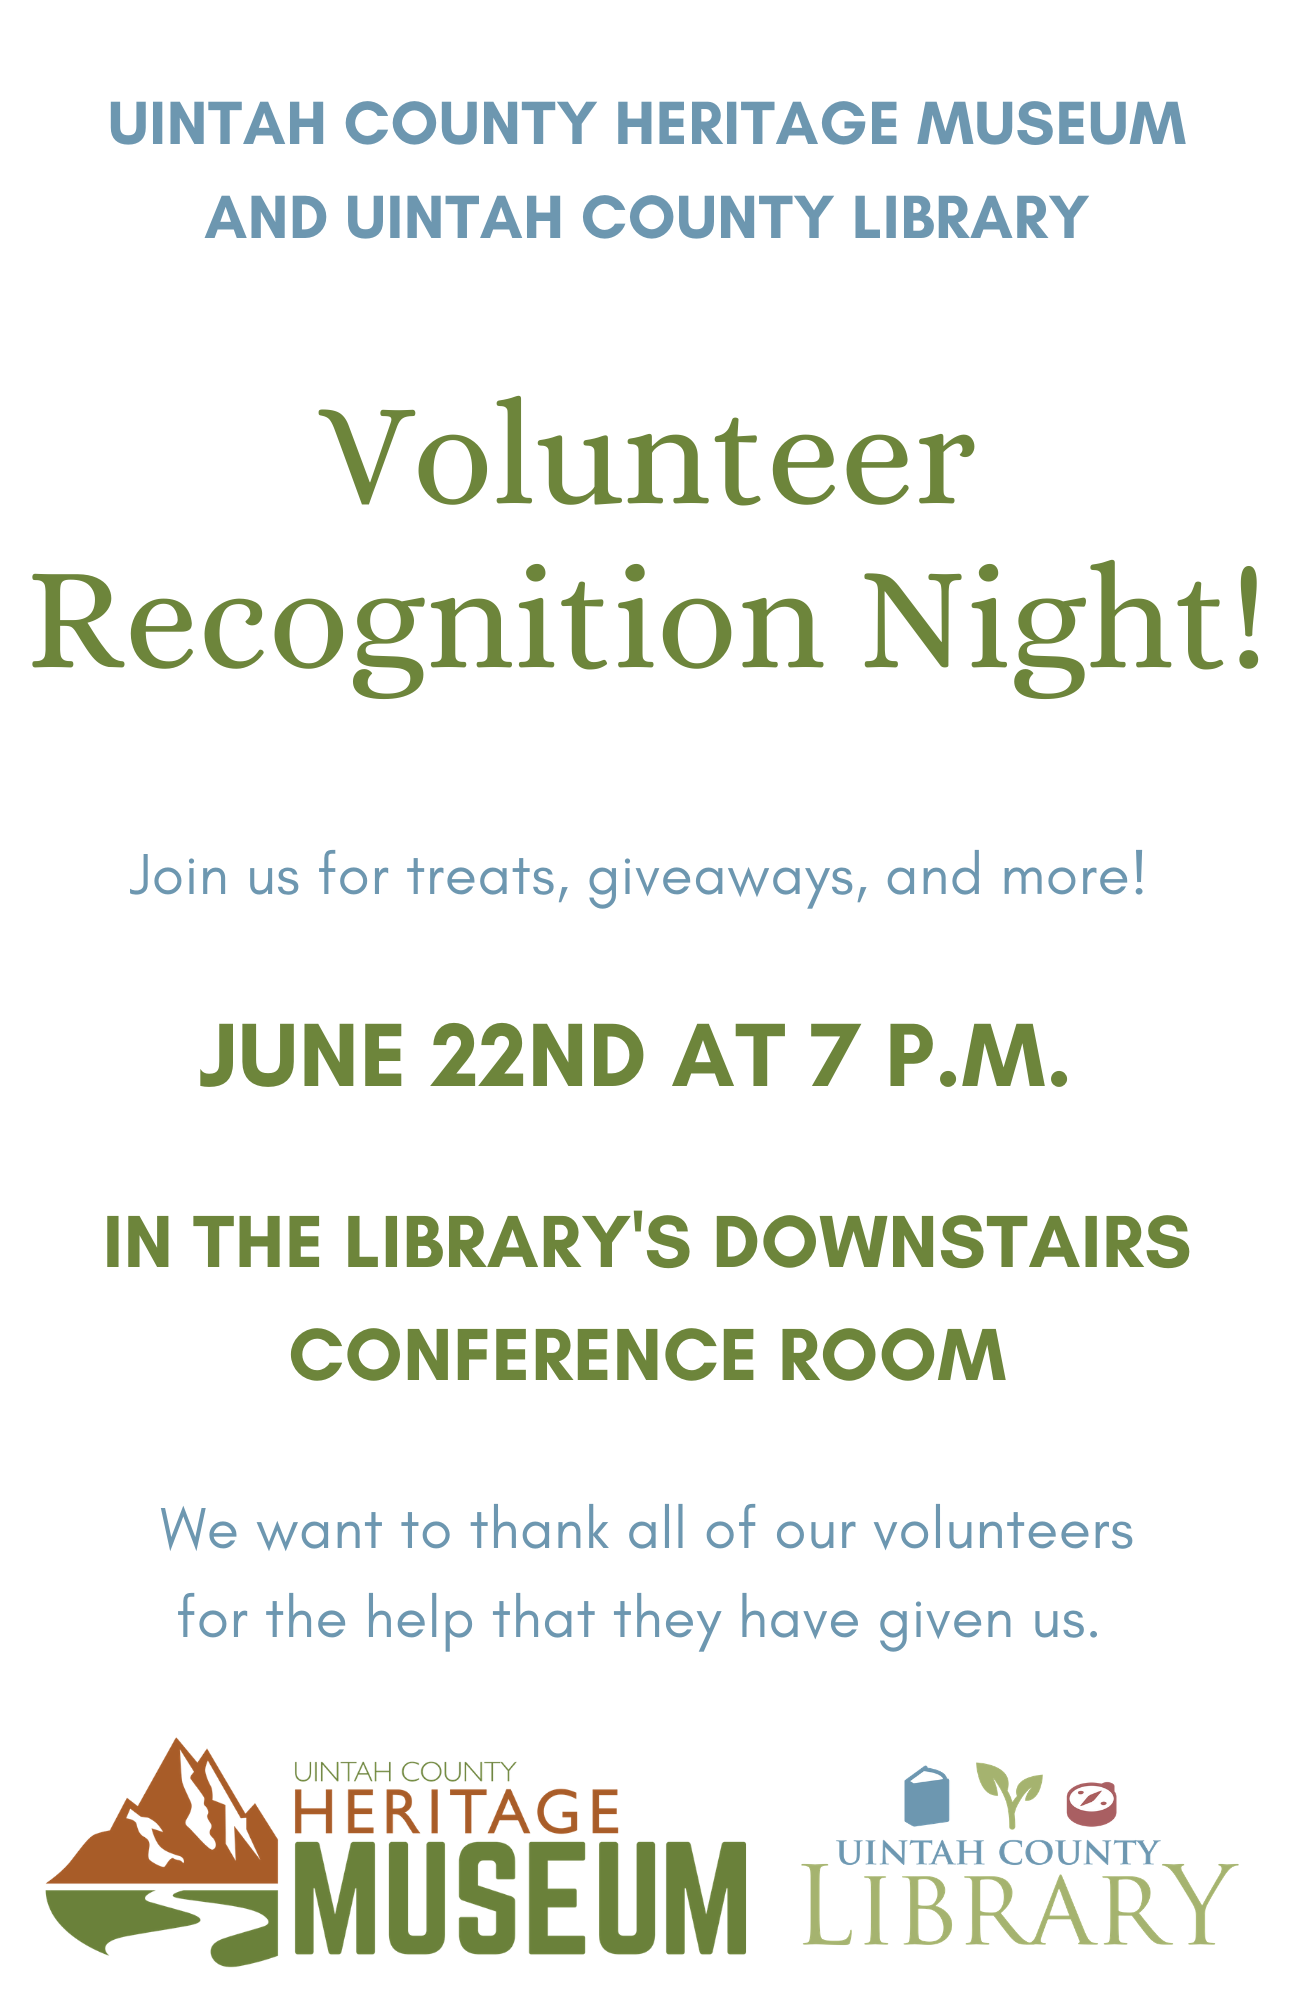 Uintah County Heritage Museum and Uintah County Library: Volunteer Recognition Night! Join us for treats, giveaways, and more! June 22nd at 7 p.m. in the Library's downstairs conference room. We want to thank all of our volunteers for the help that they have given us. 